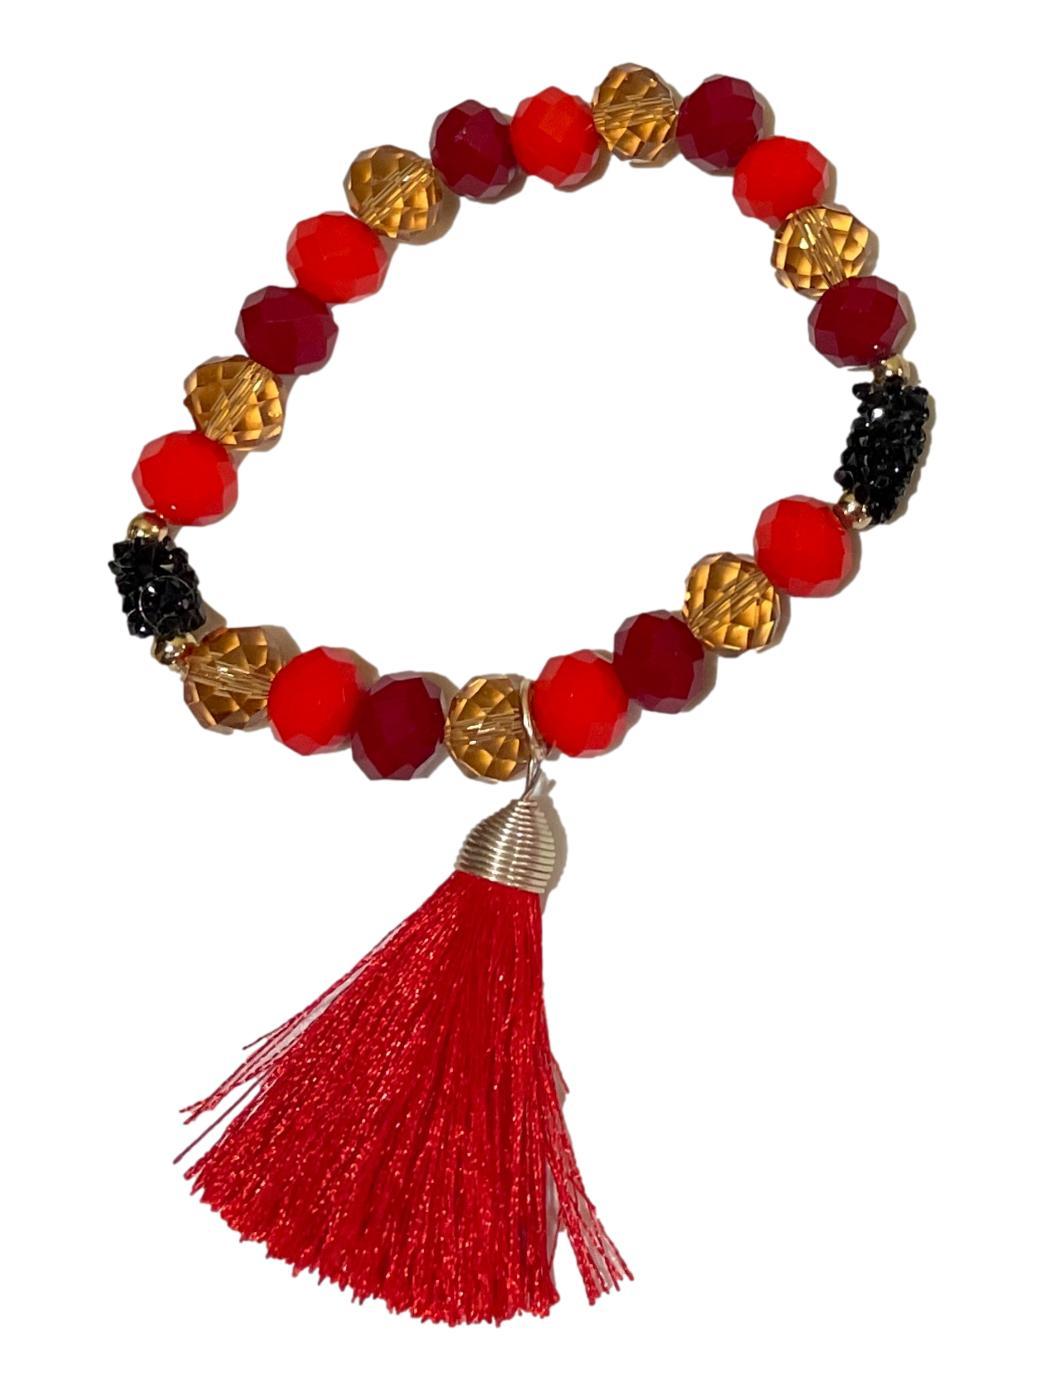 Bracelet Red Glass Beads Red Tassel Handcrafted